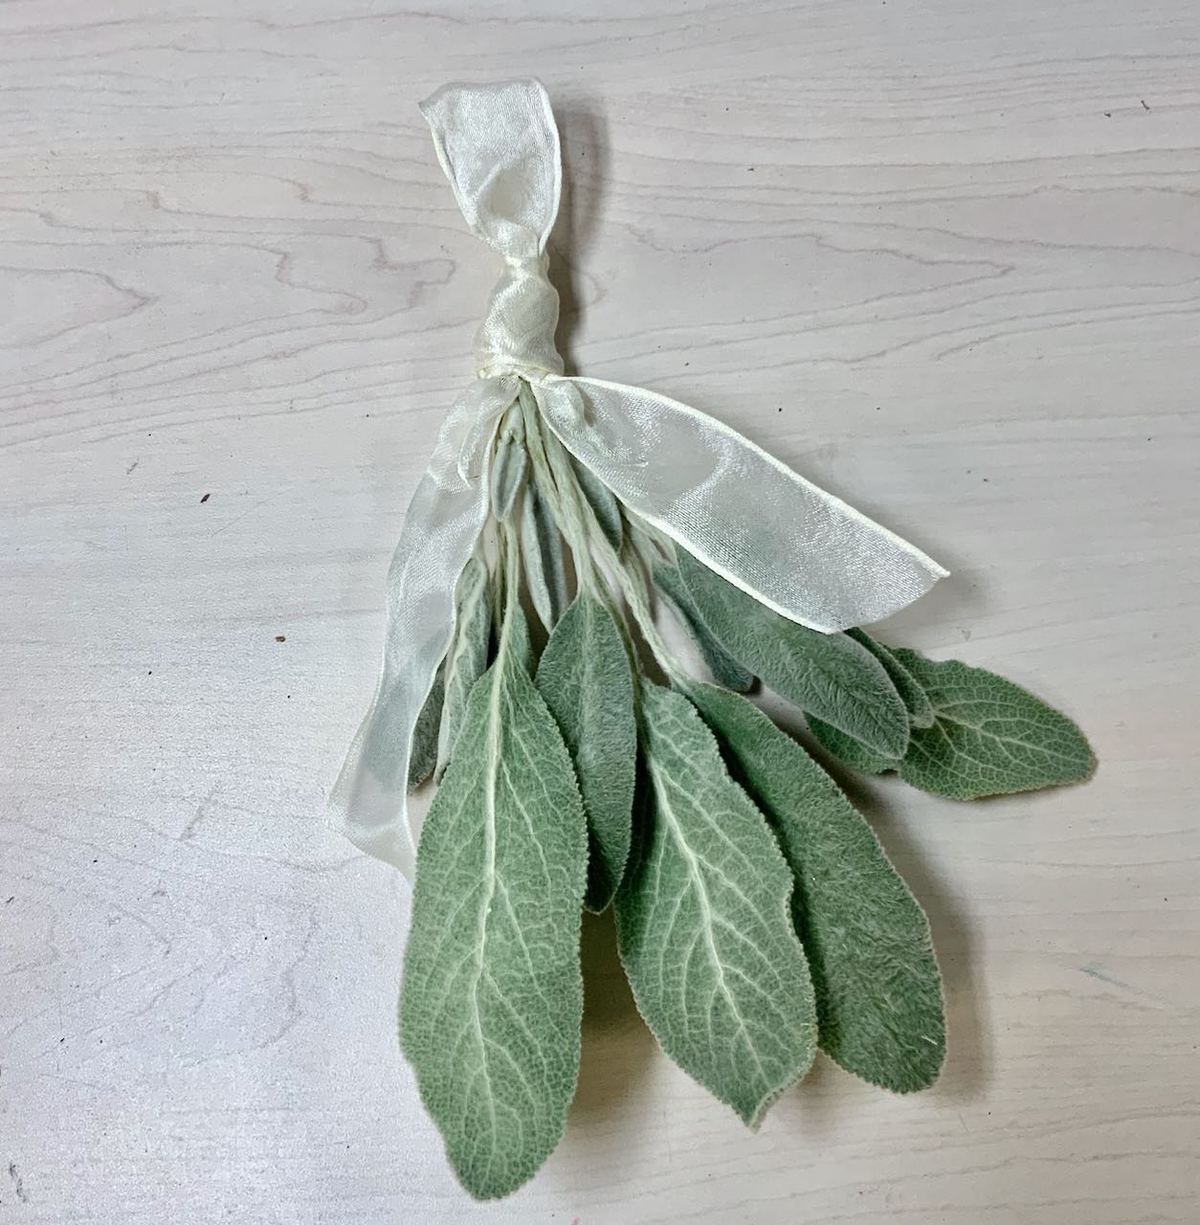 Finished bundle of dried lambs ear with ribbon tied around the stems and loop